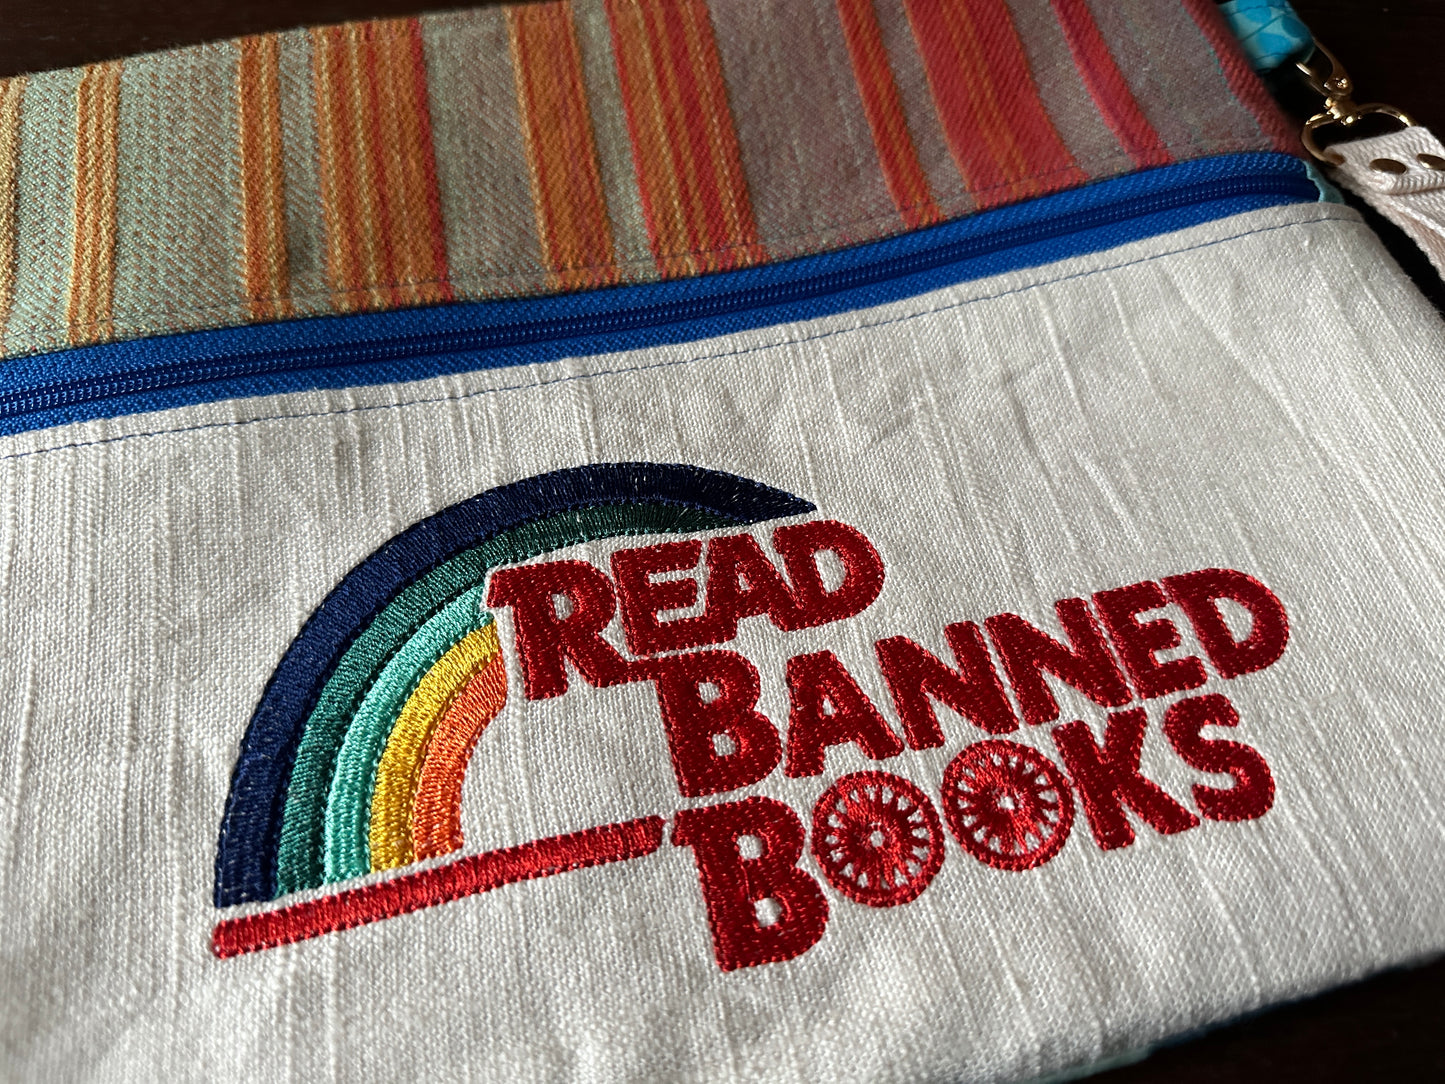 Read Banned Books Large Double Zipper Sleeve and Tablet Pouch